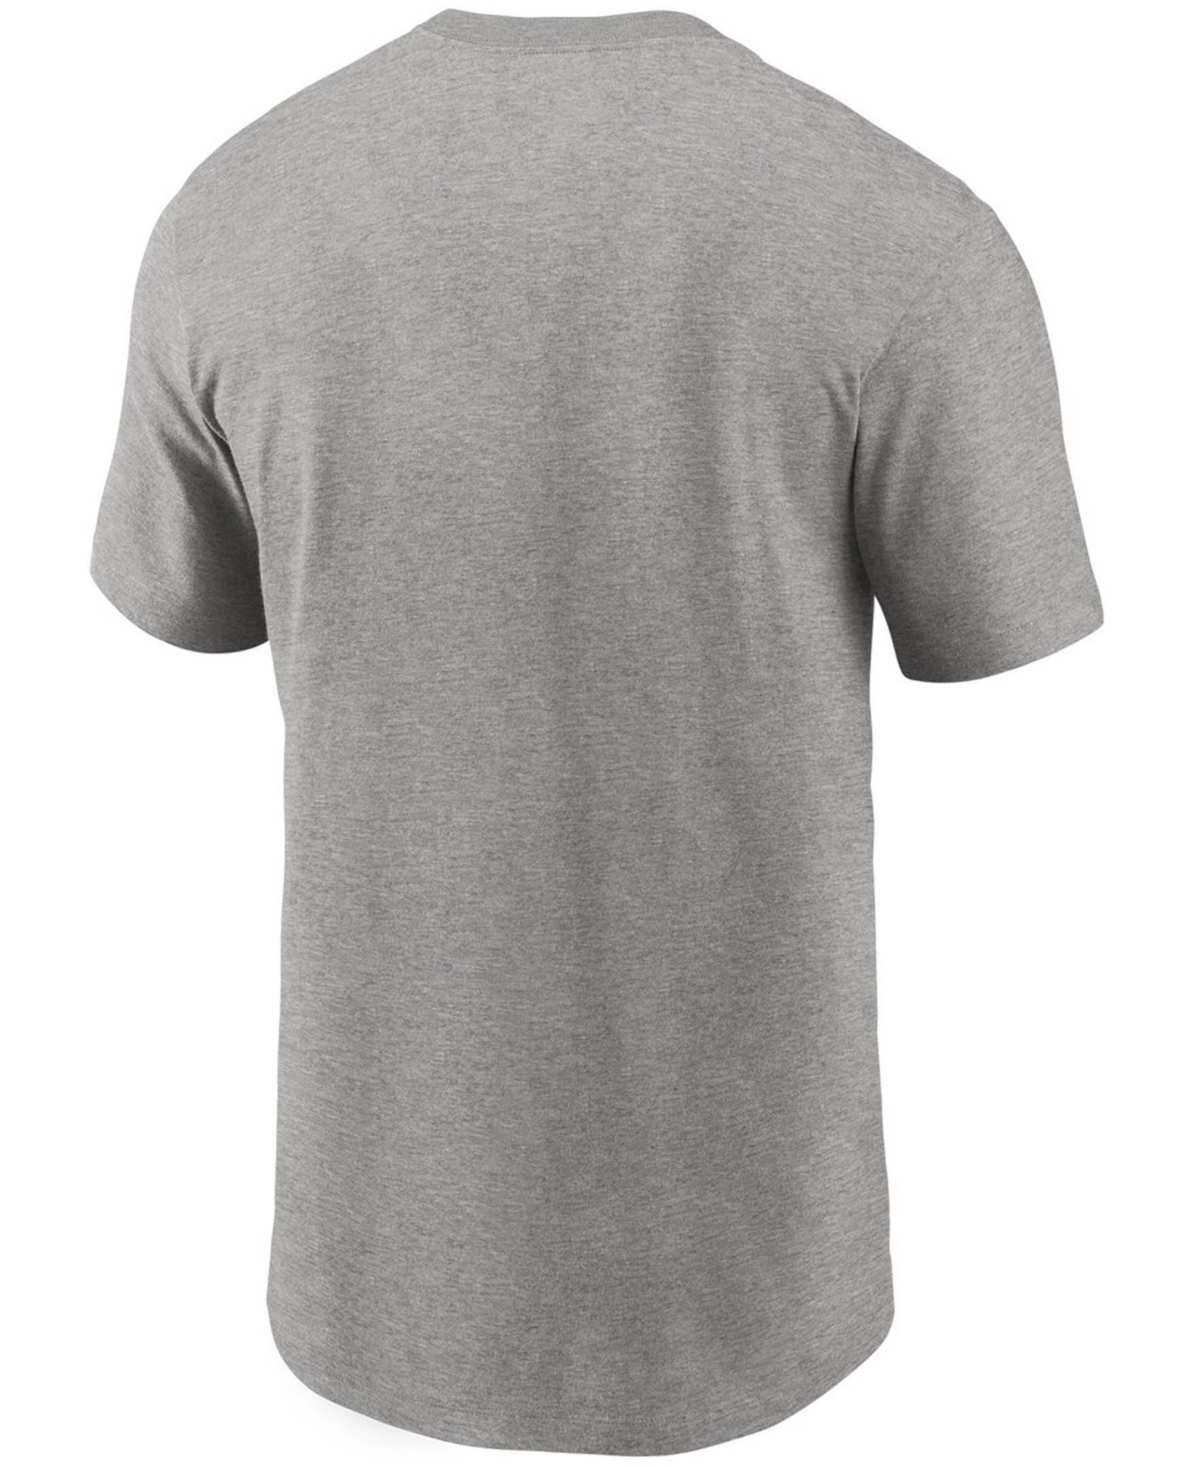 Shop Nike Men's  Heathered Gray Tennessee Titans Primary Logo T-shirt